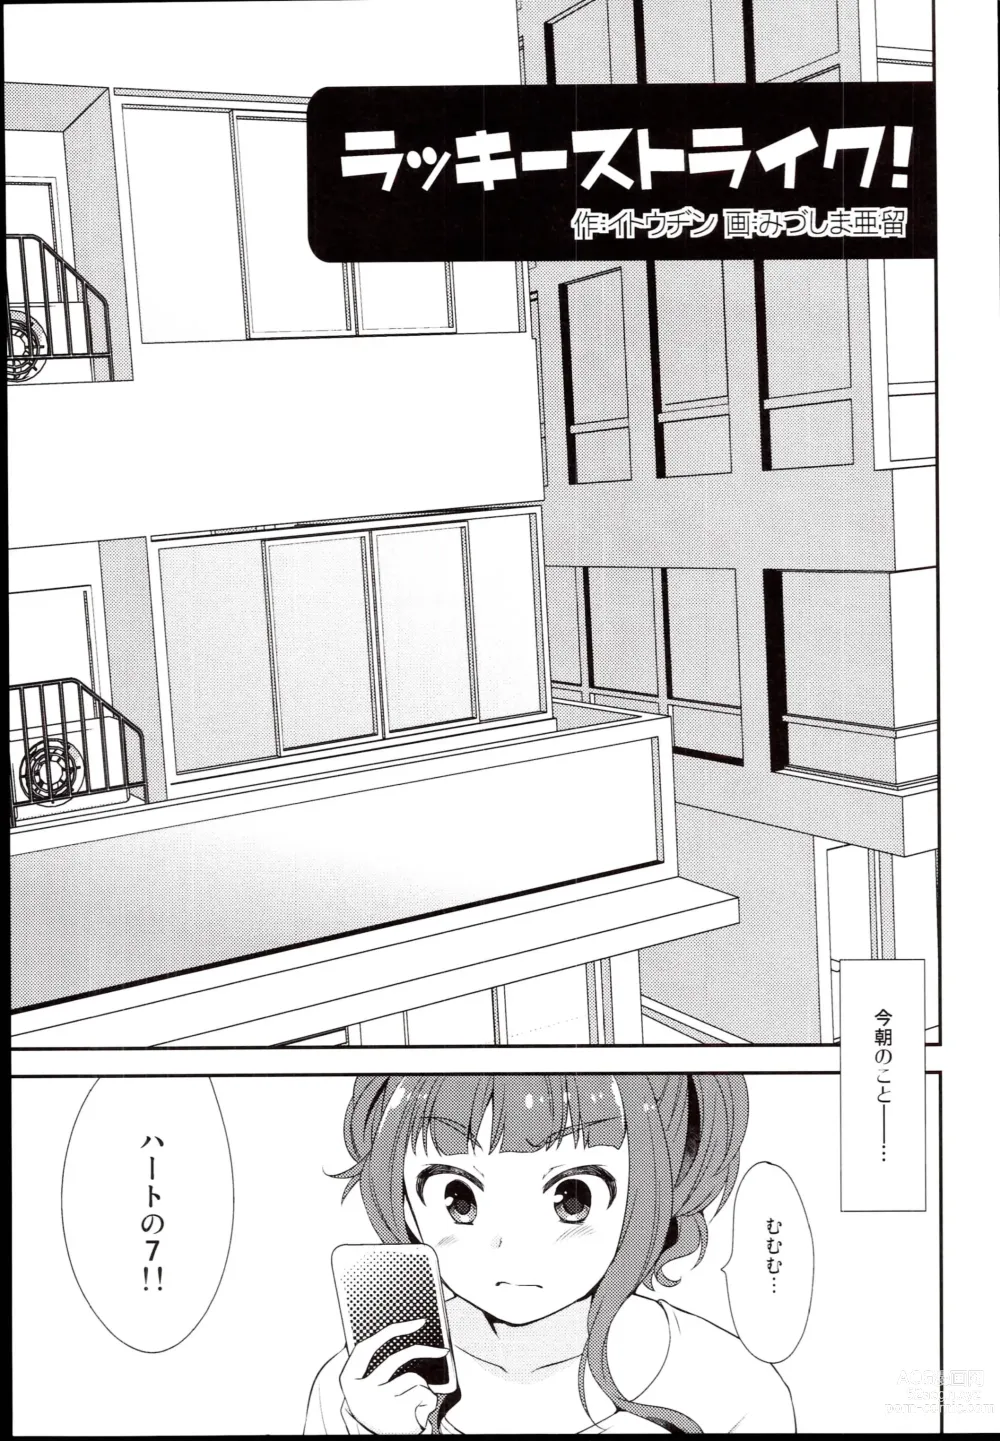 Page 7 of doujinshi LUCKY STRIKE!